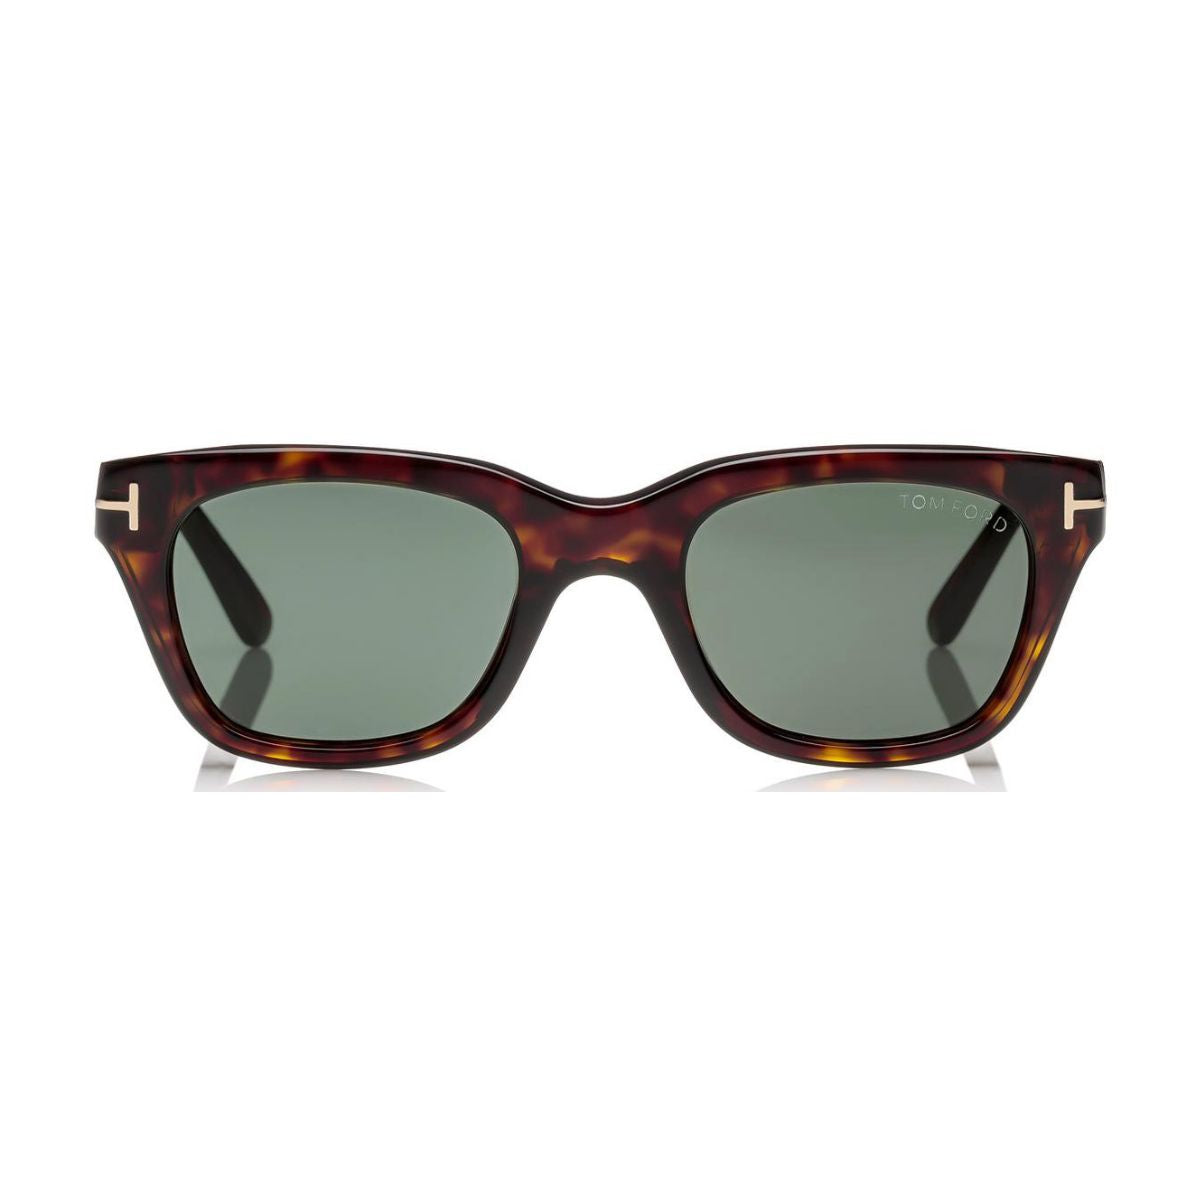 "Buy Online Cateye Tom Ford Frames For Womens At Optorium"